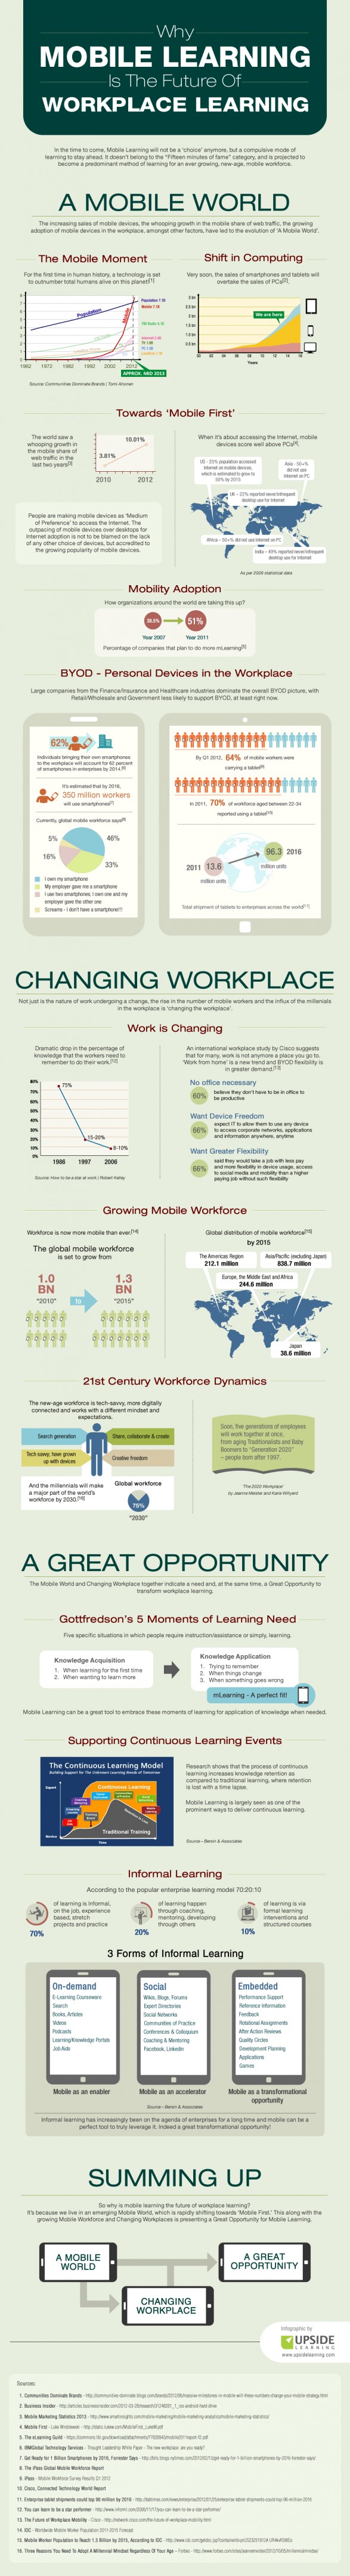 Why Mobile Learning Is The Future Of Workplace Learning